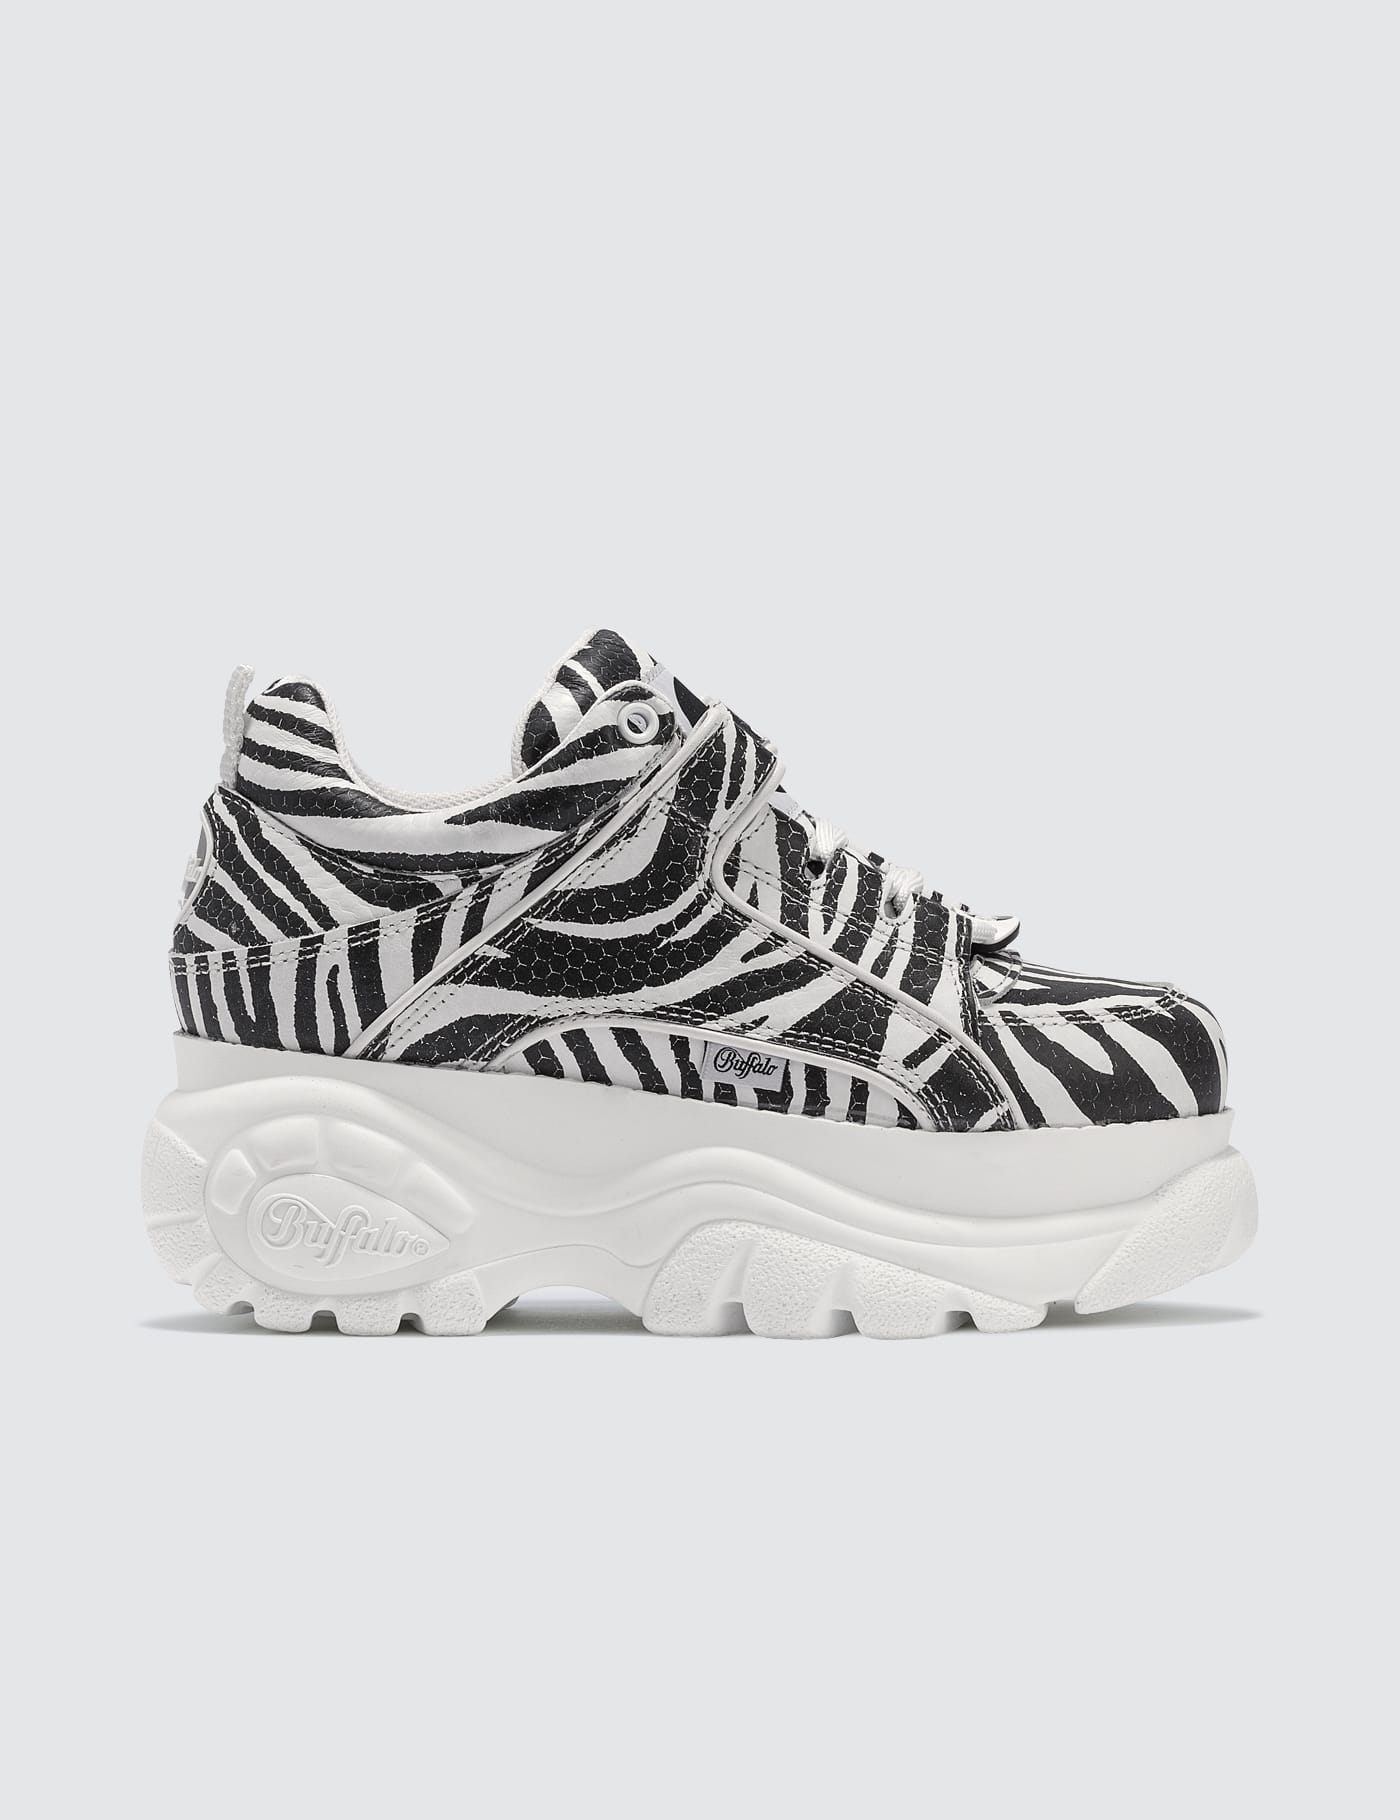 Buffalo London - Buffalo Classic Zebra Low-top Platform Sneakers | HBX -  Globally Curated Fashion and Lifestyle by Hypebeast